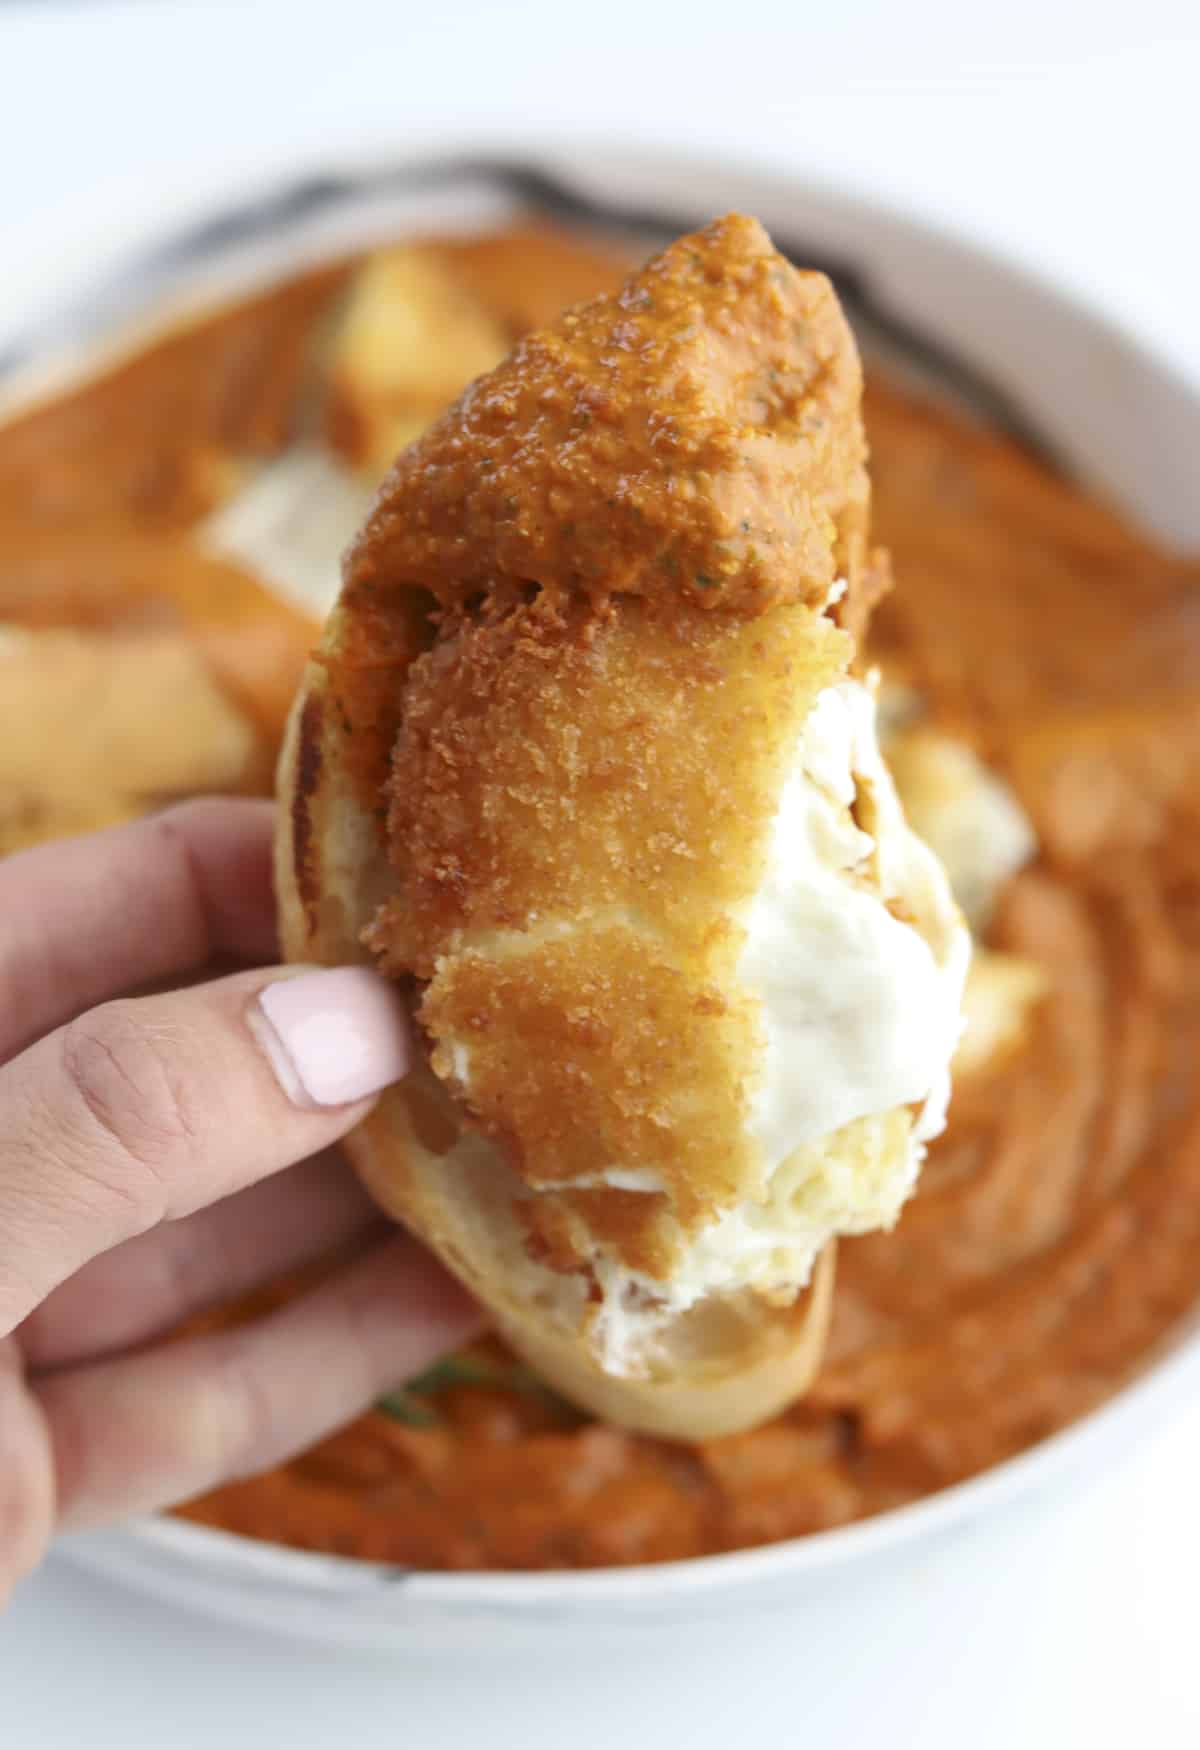 one fried burrata with romesco sauce on a baguette 